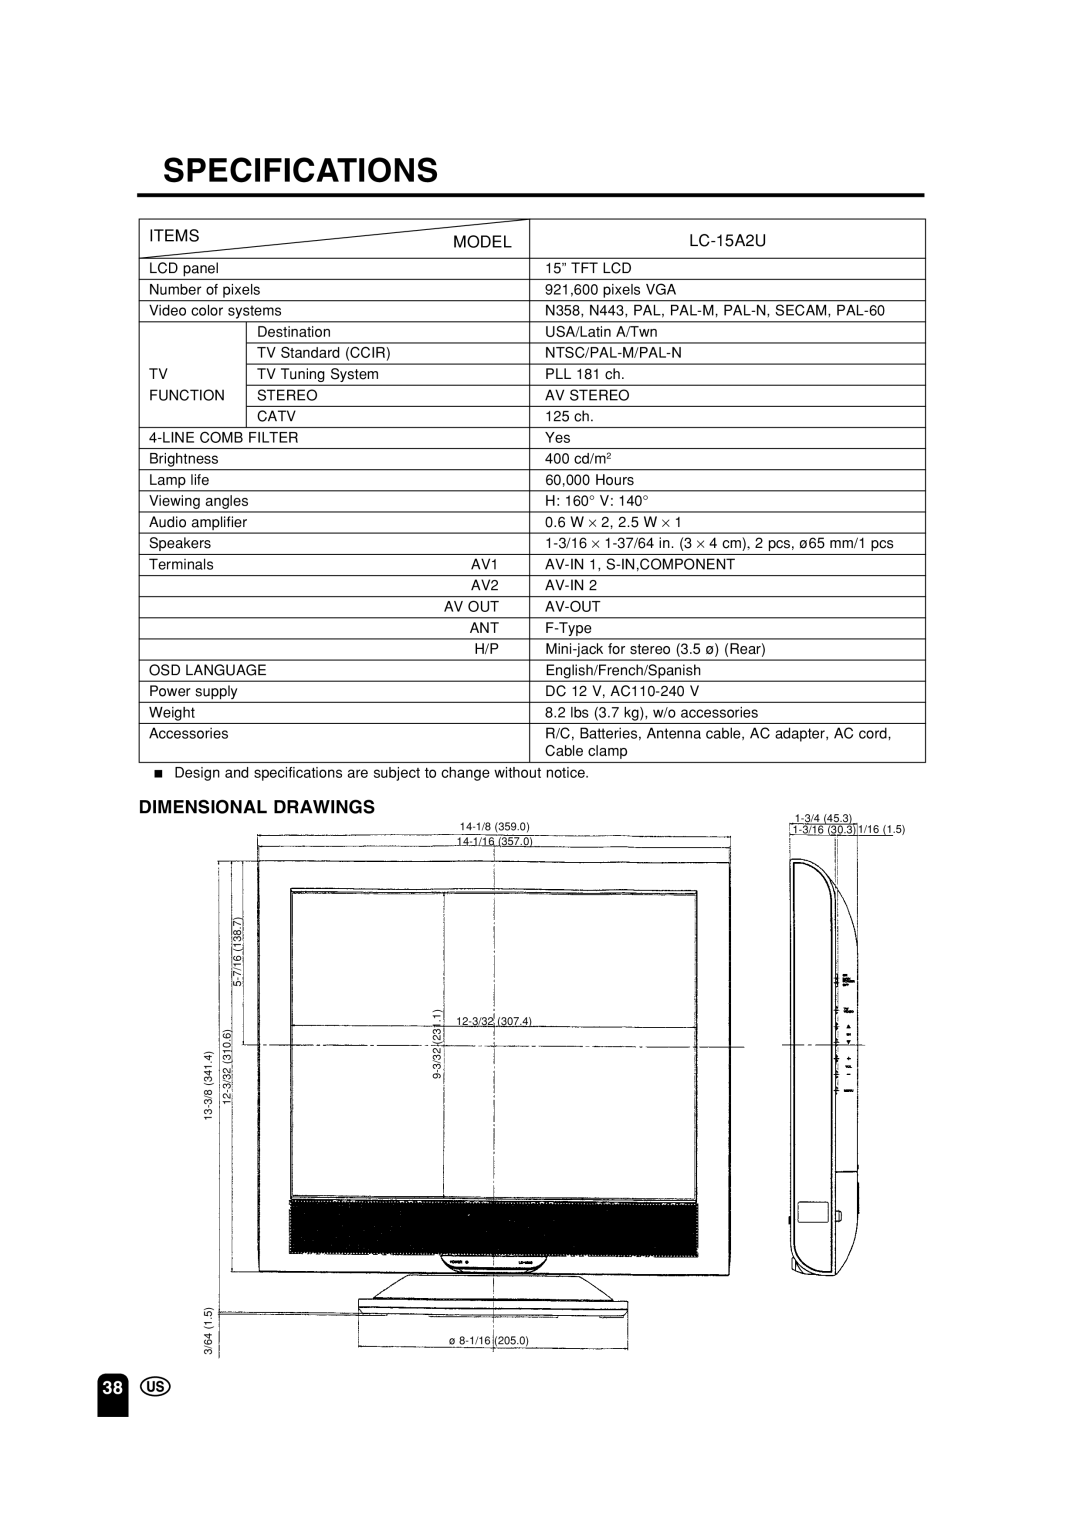 Sharp LC 15A2U operation manual Specifications, Dimensional Drawings 